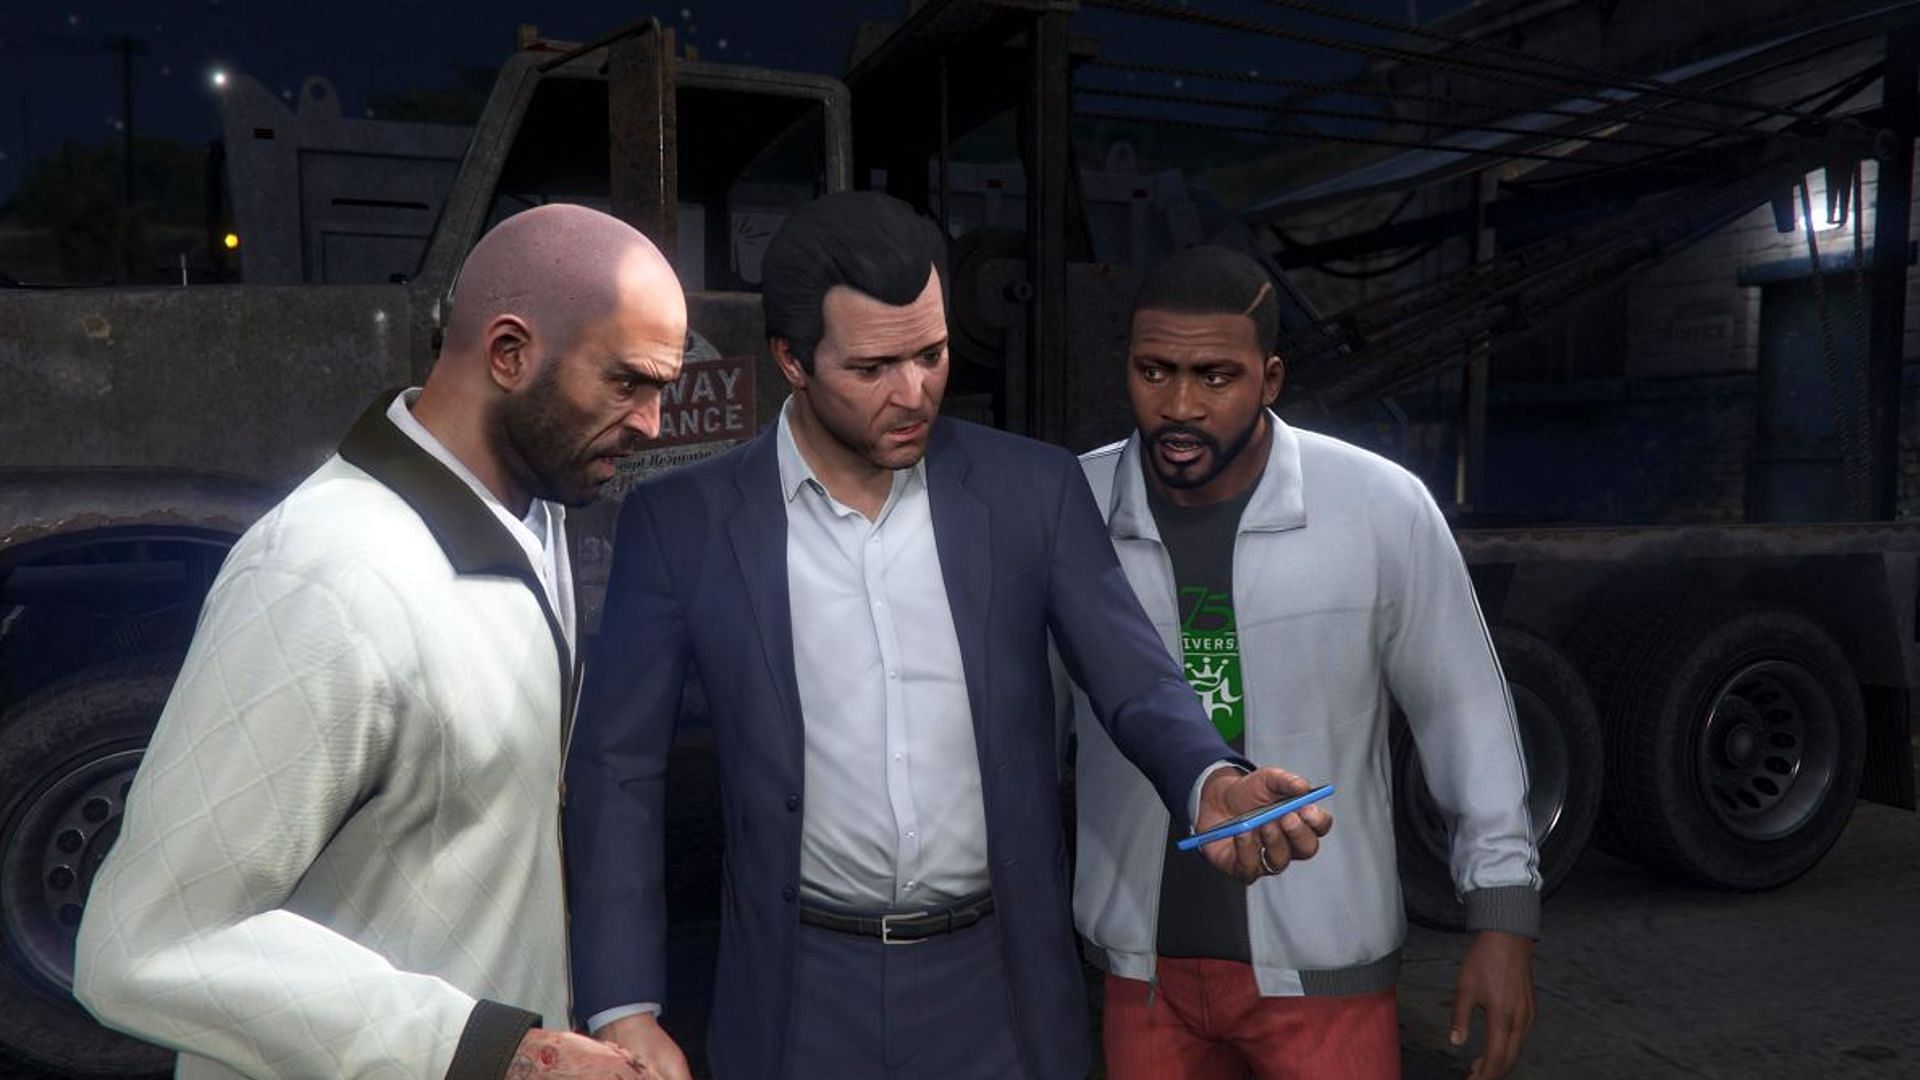 GTA 6 announcement trailer details have allegedly leaked - Charlie INTEL